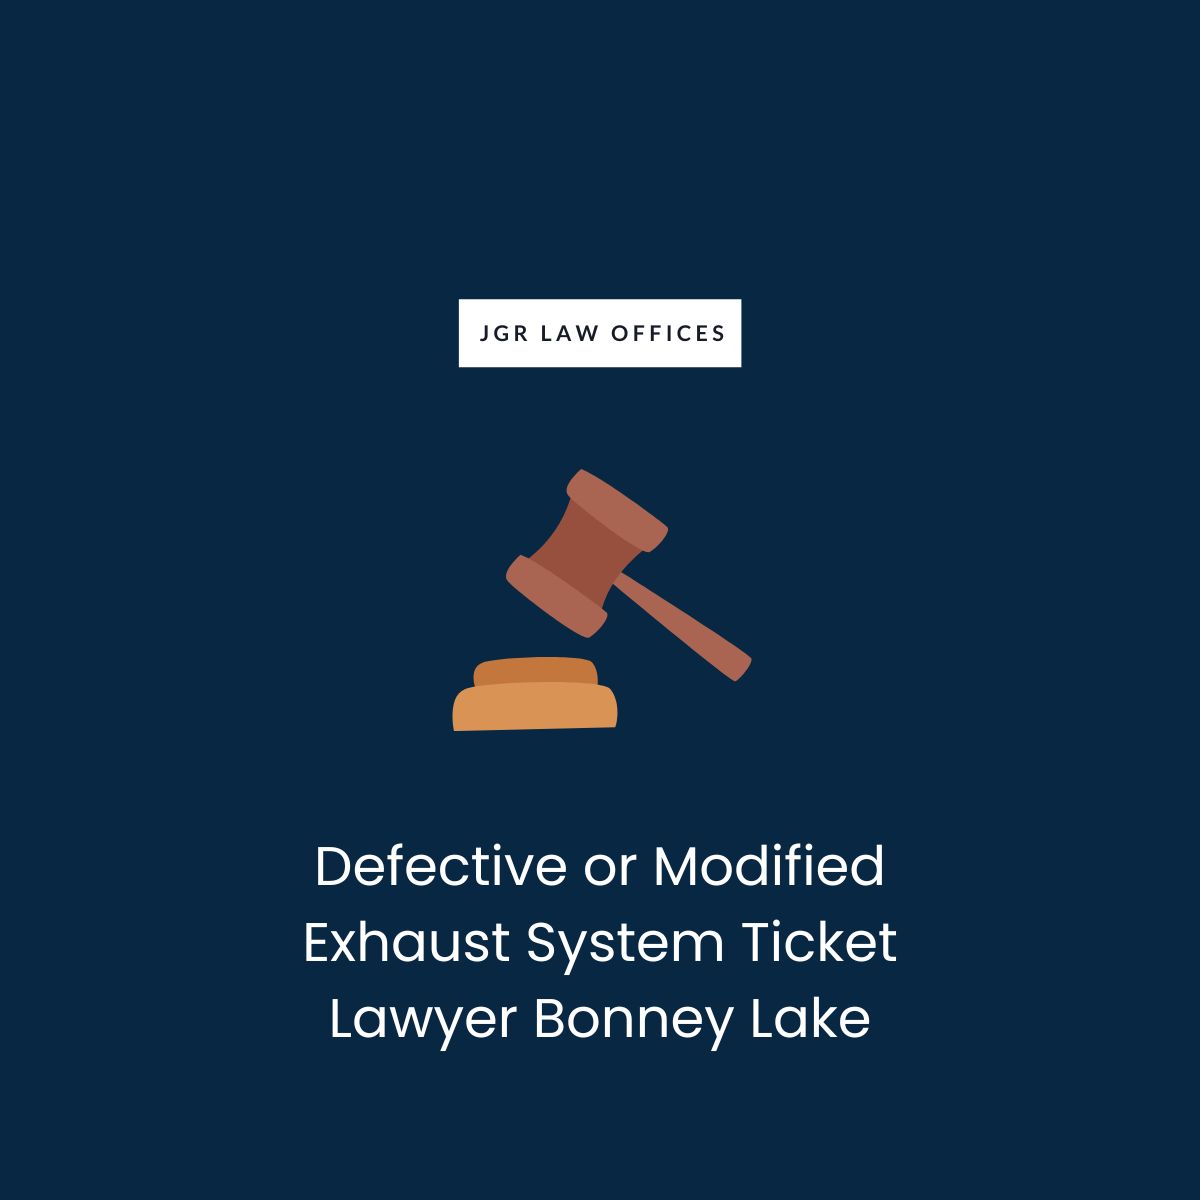 Defective or Modified Exhaust System Ticket Attorney Bonney Lake